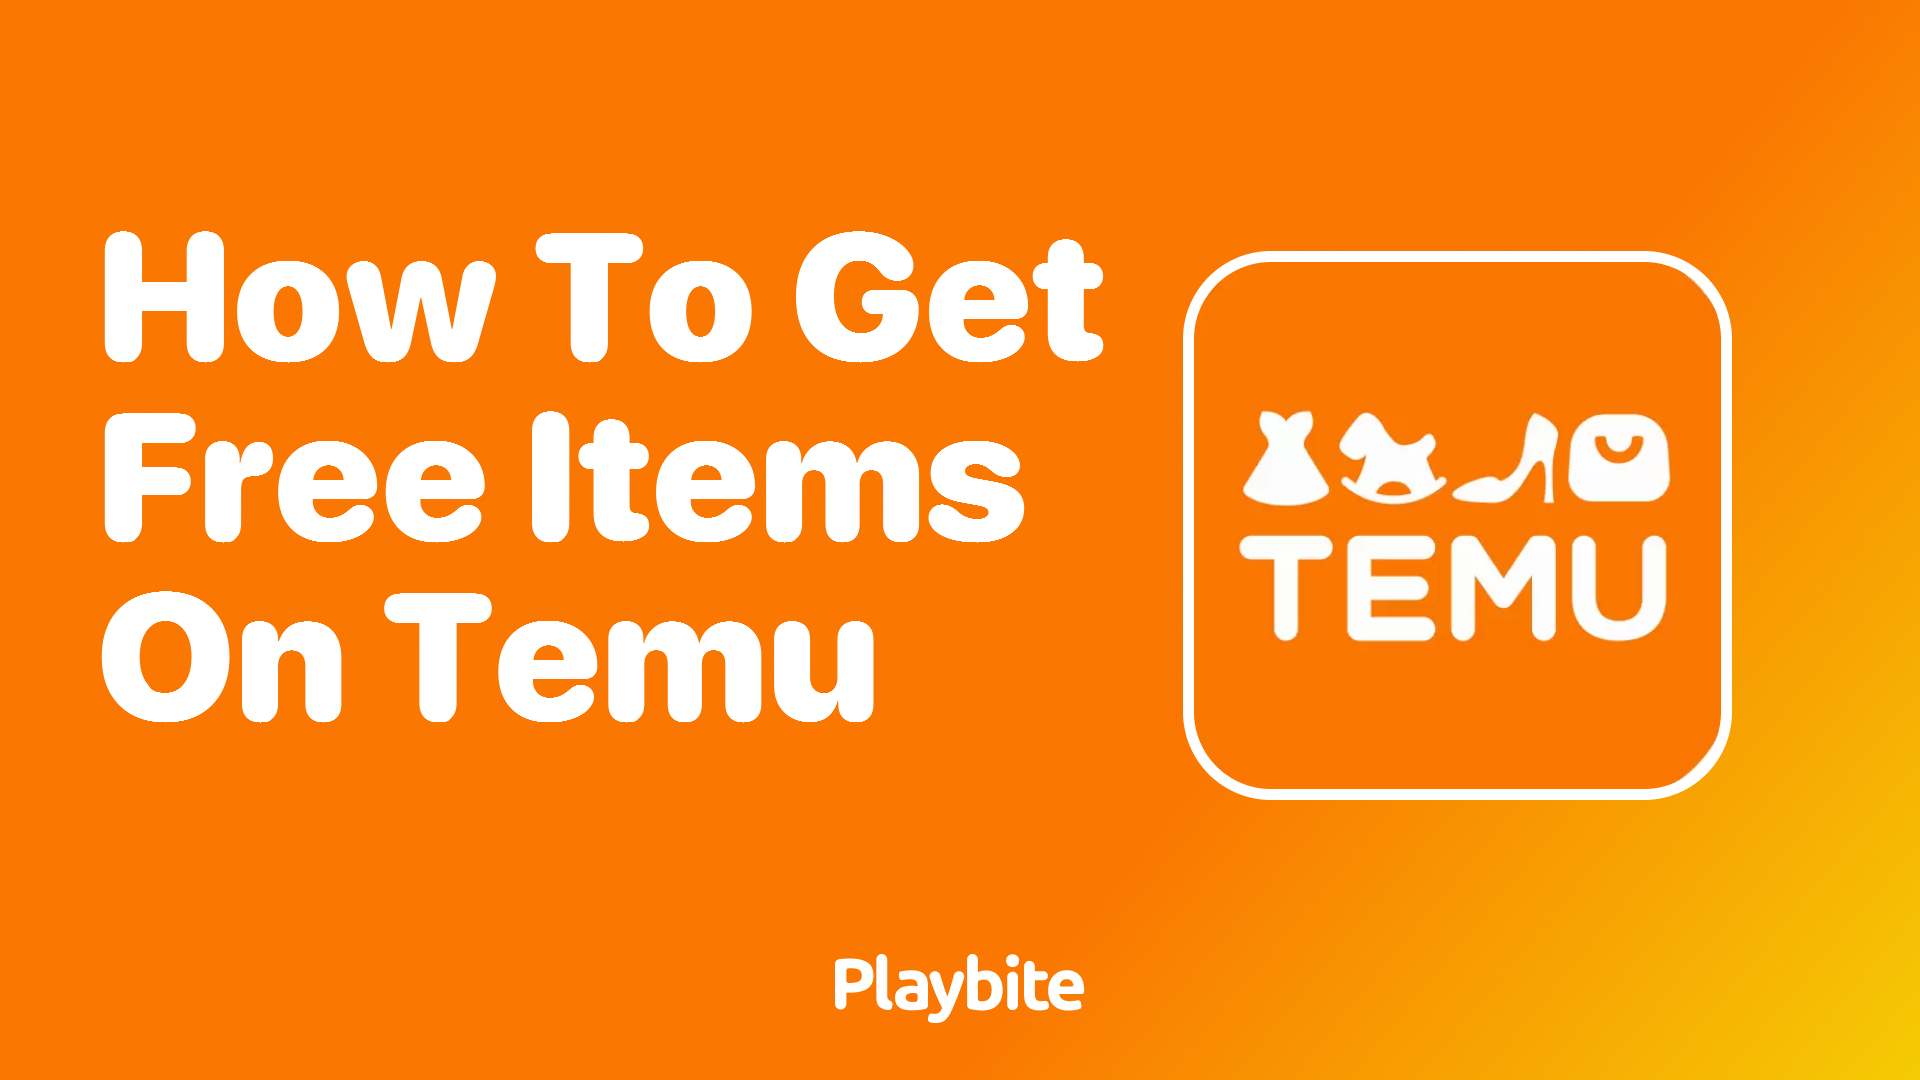 How to Get Free Items on Temu